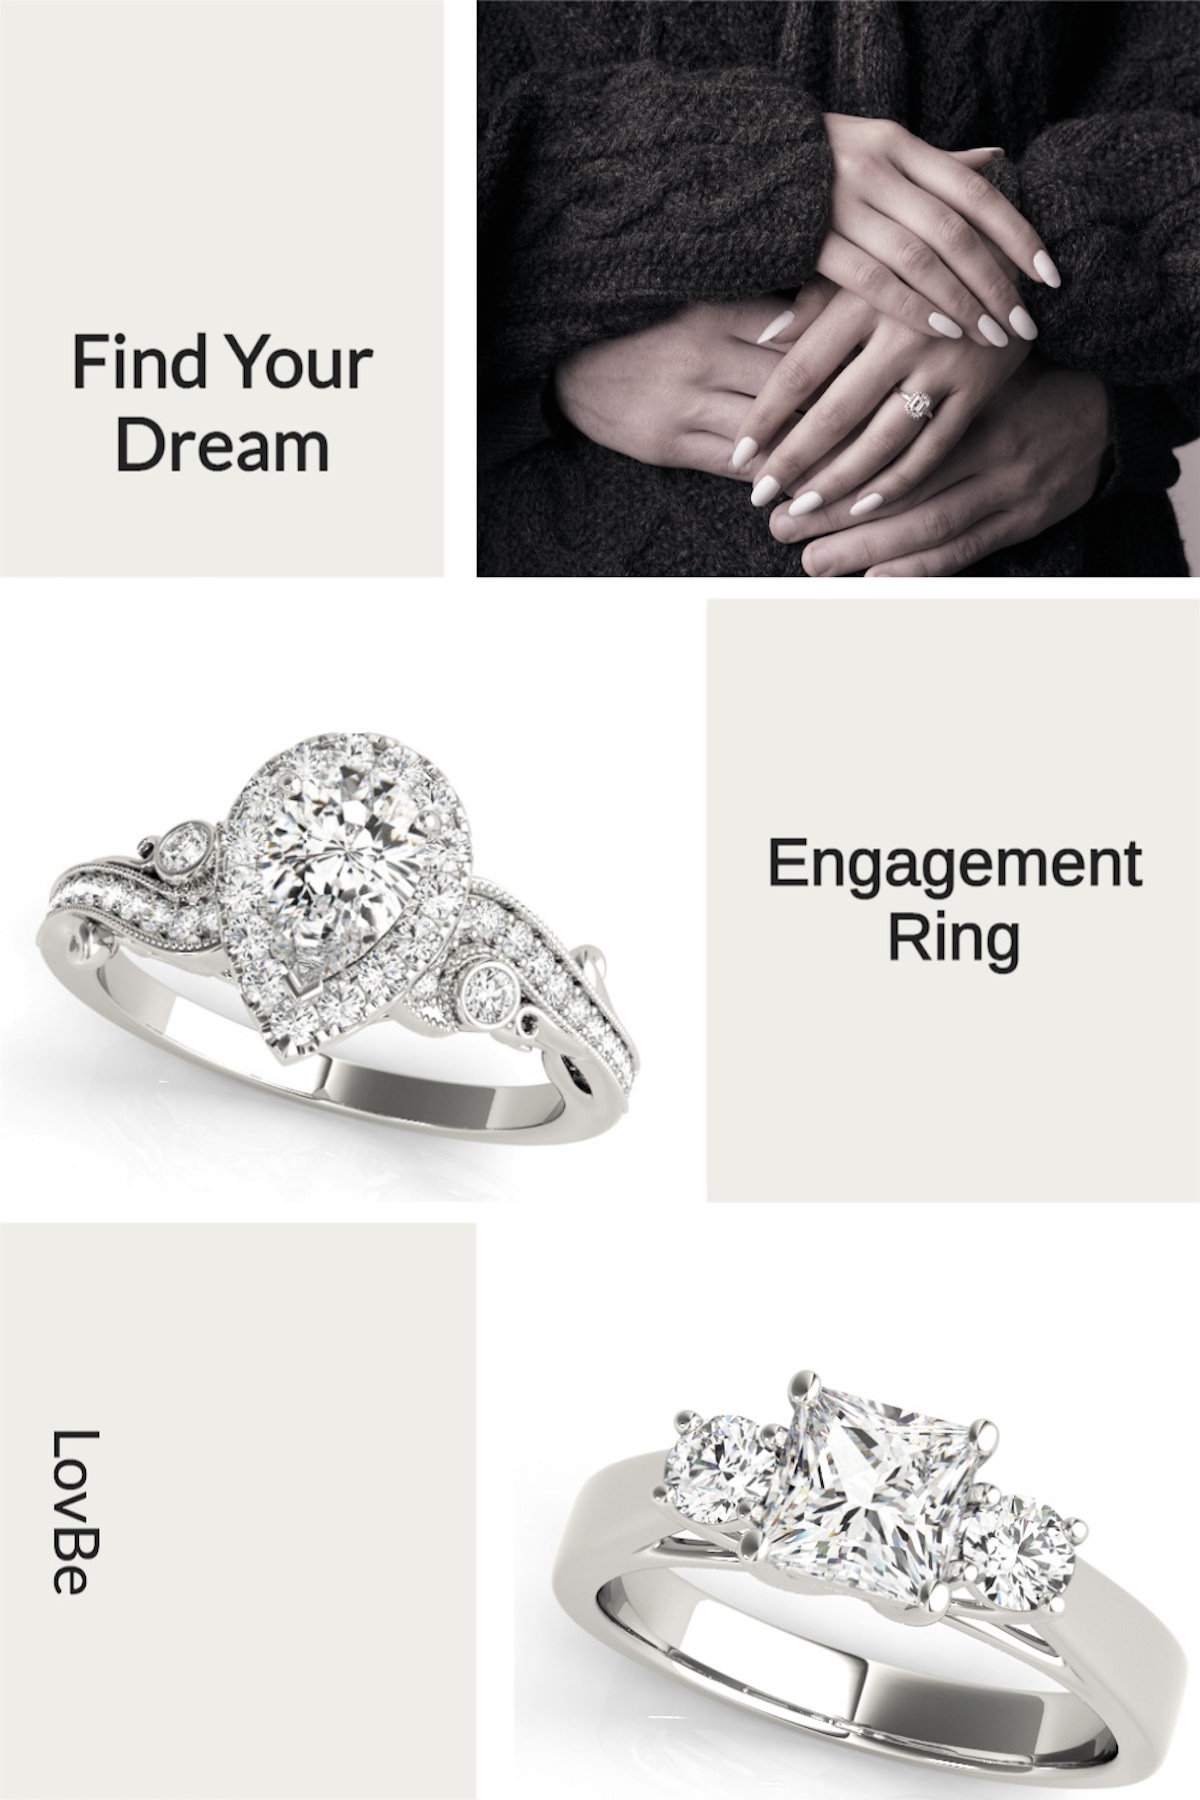 Find Your Dream Ring Just in Time for Engagement Season with LovBe